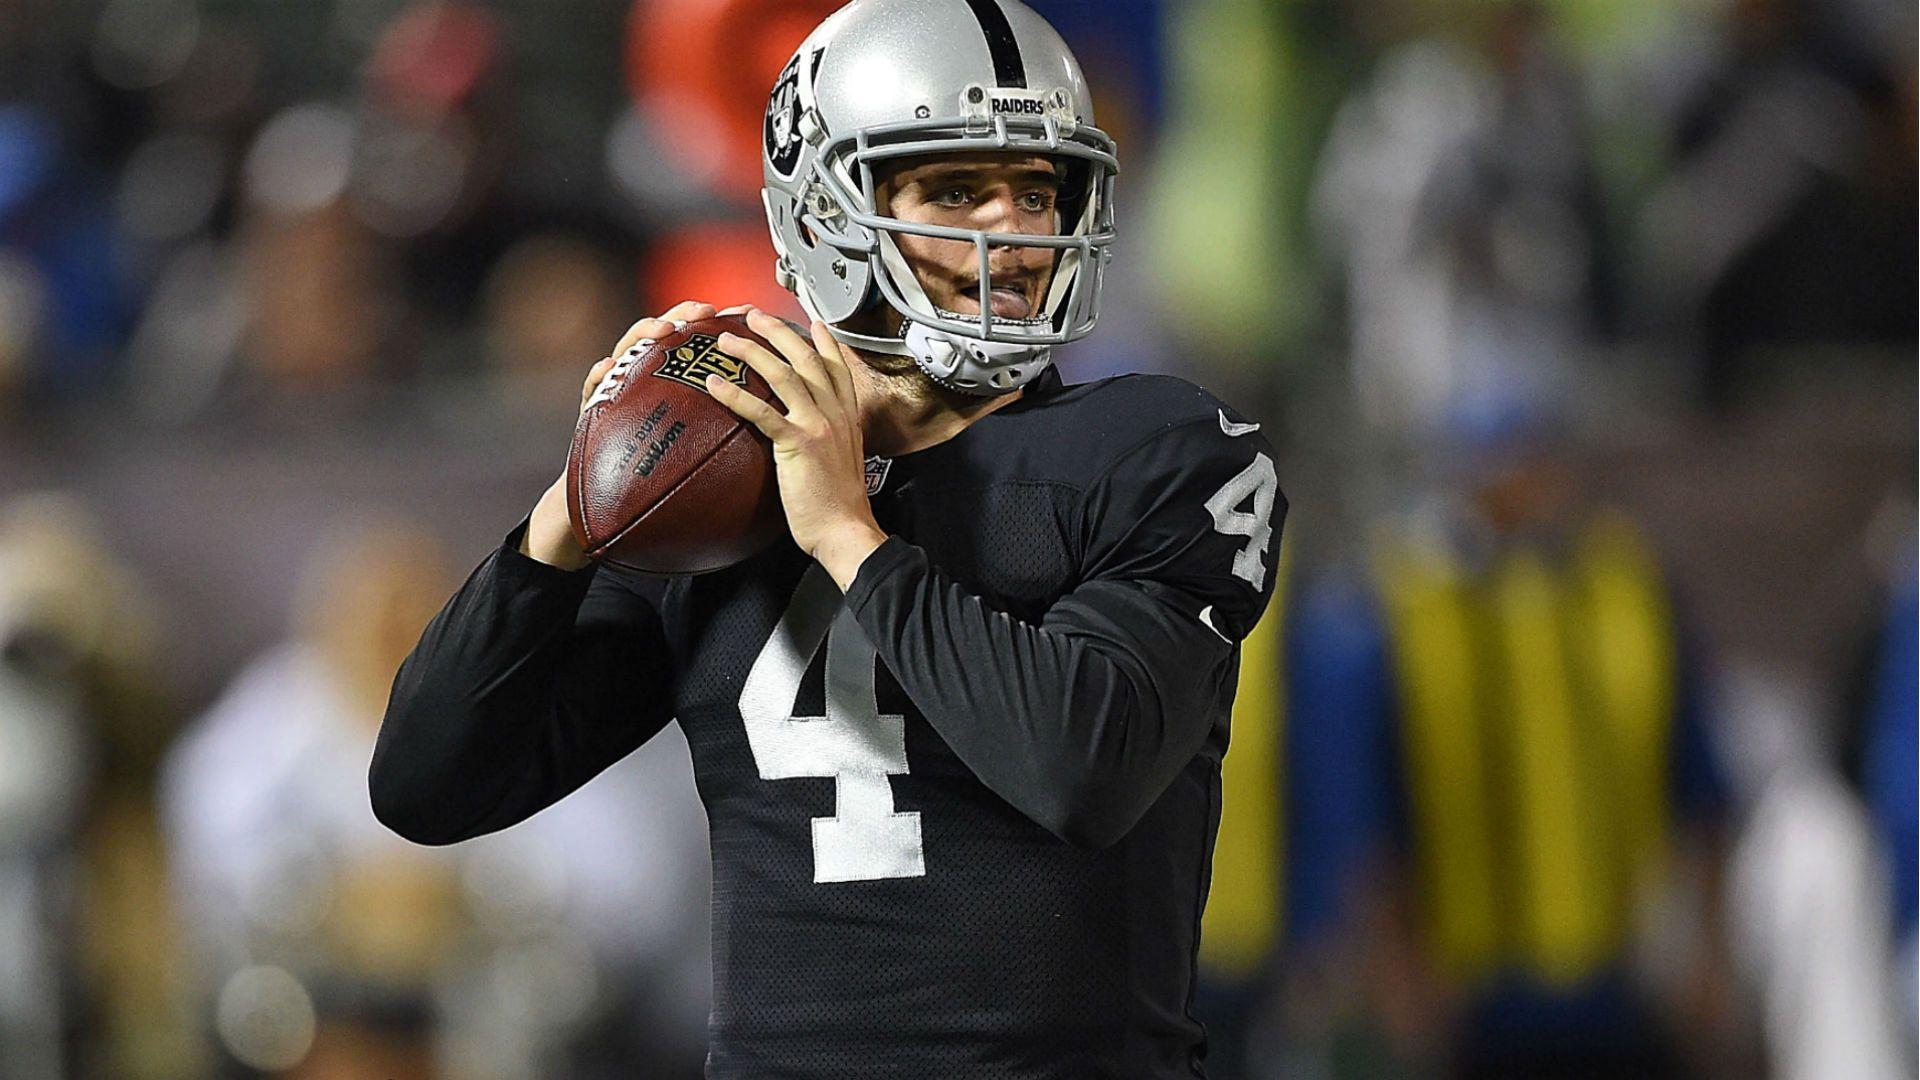 Fantasy Football Sleepers 2015: Carr has breakout potential